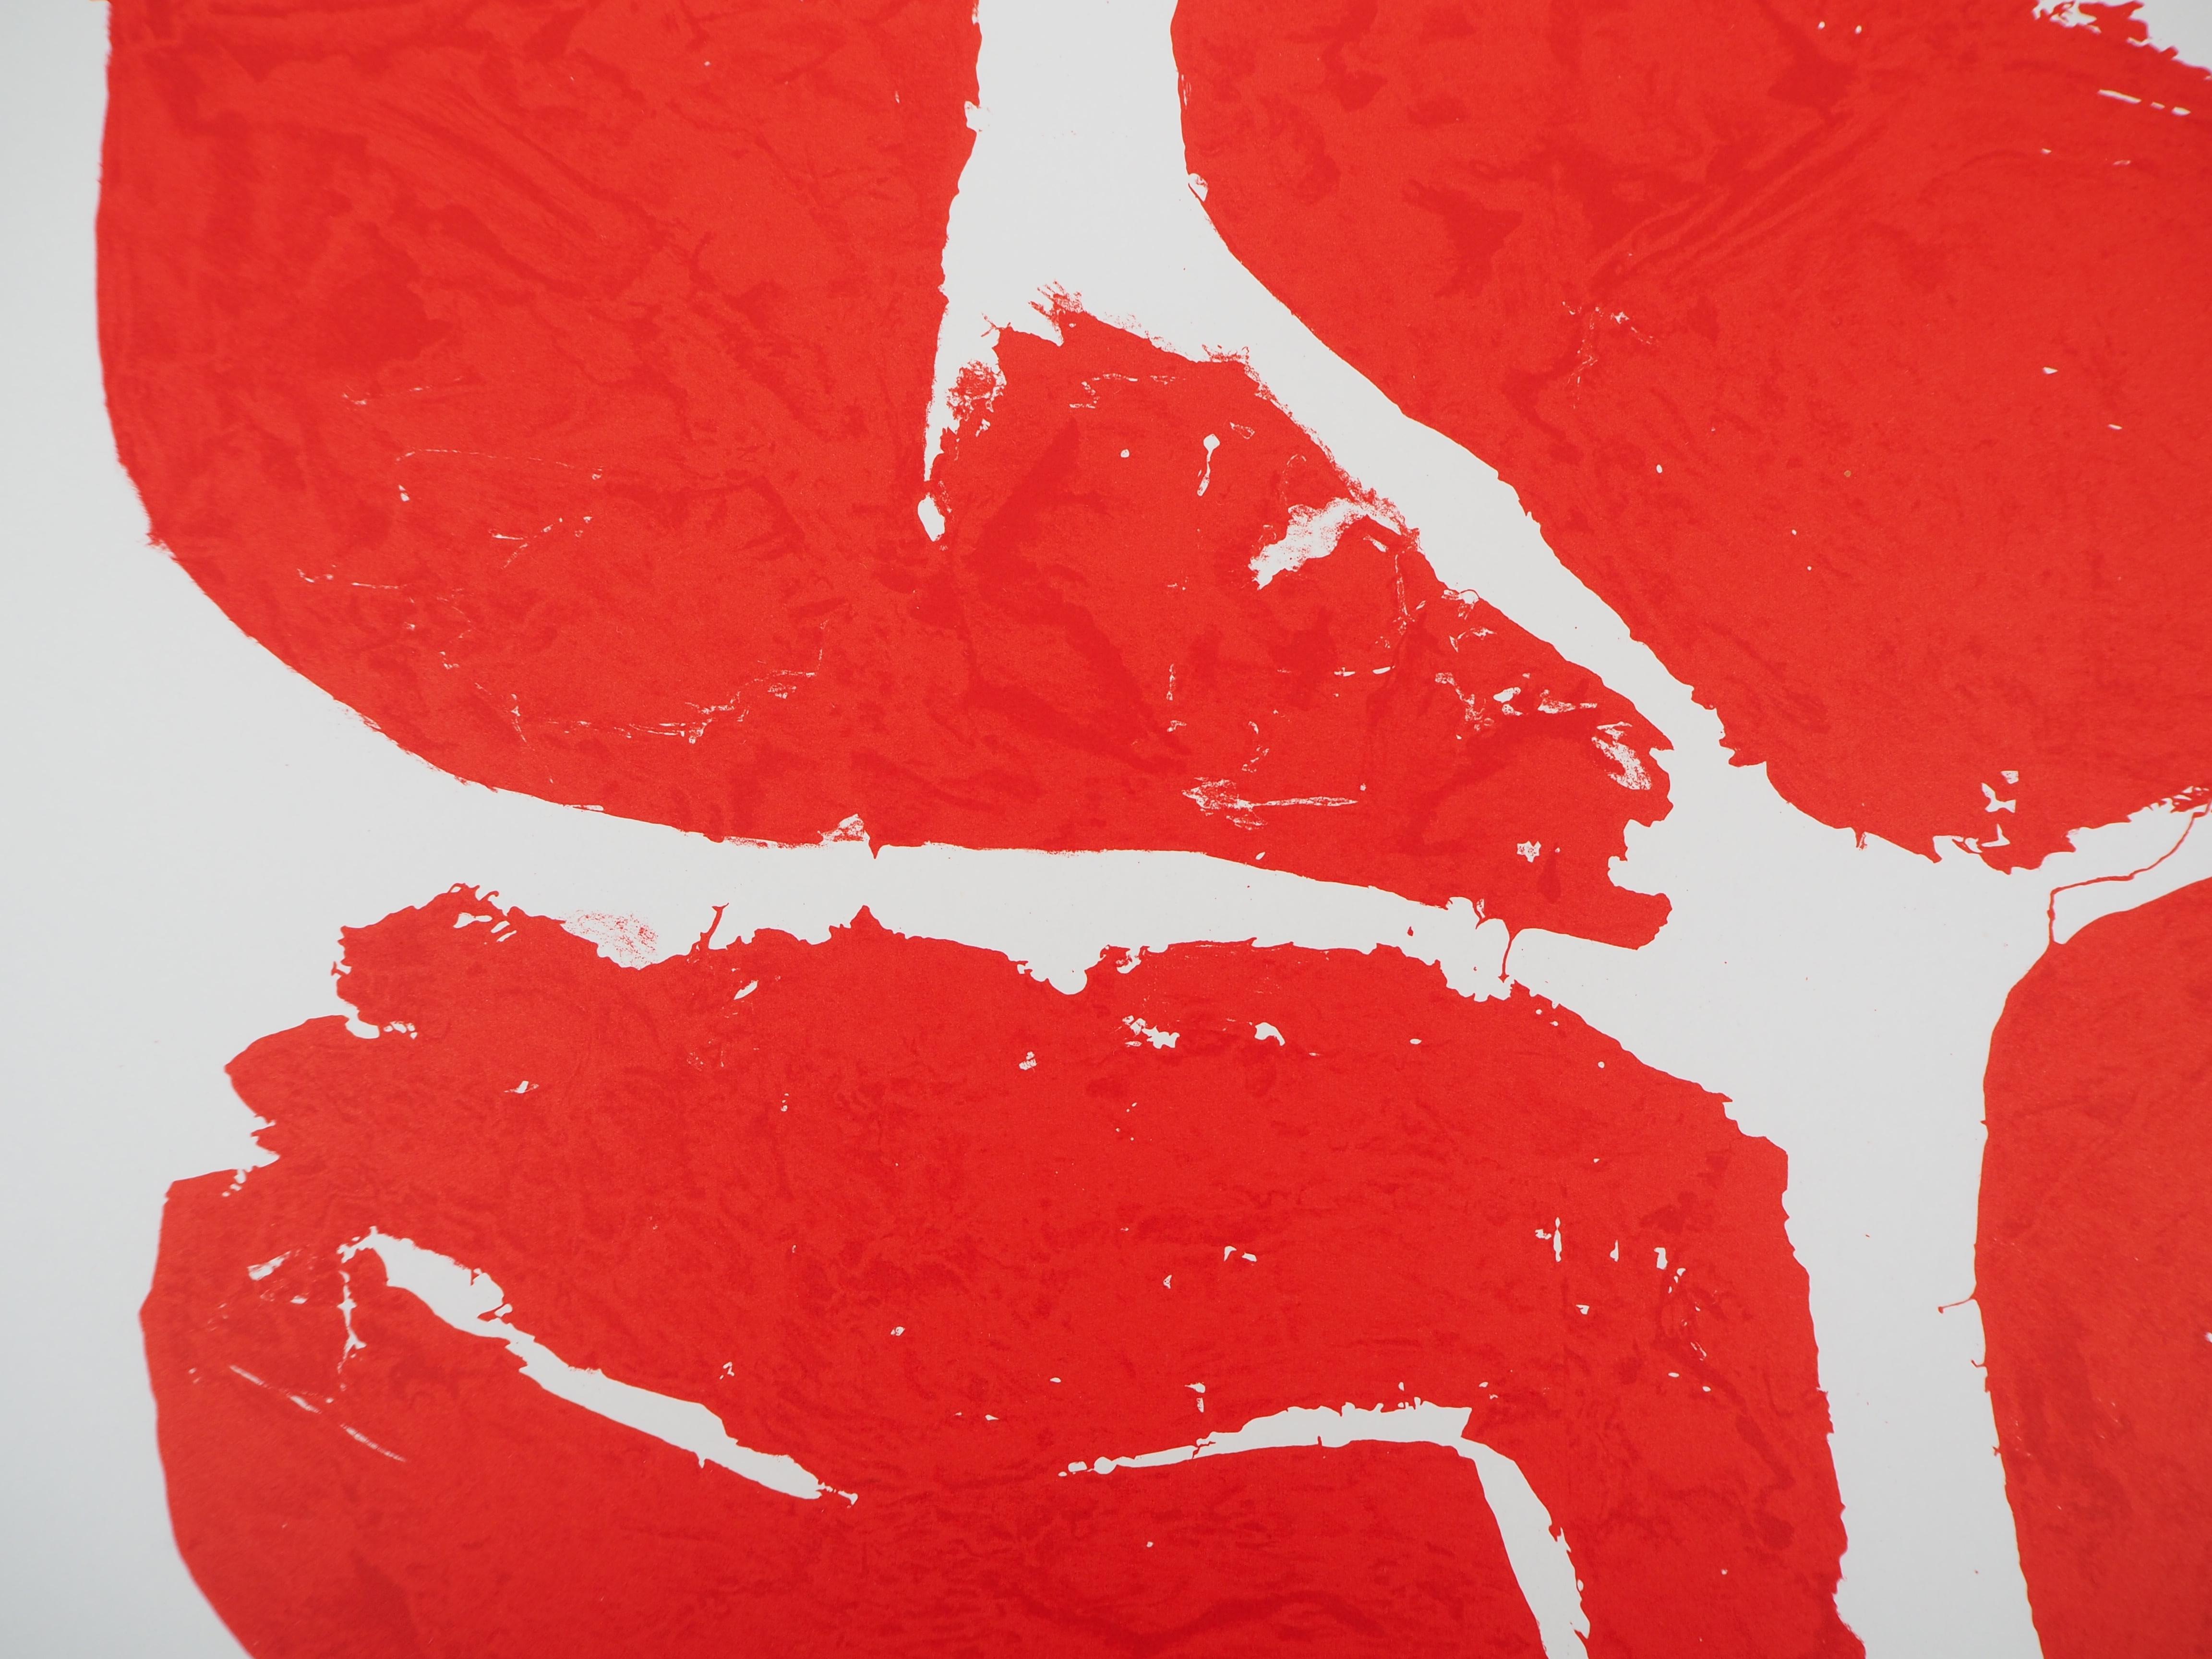 Simon HANTAI
Abstract Red Tabula, 1969

Original Lithograph Poster 
On wove paper 70 x 48 cm (c. 28 x 19 in)
Created for the artist exhibition at Fondation Maeght in 1969

Excellent condition